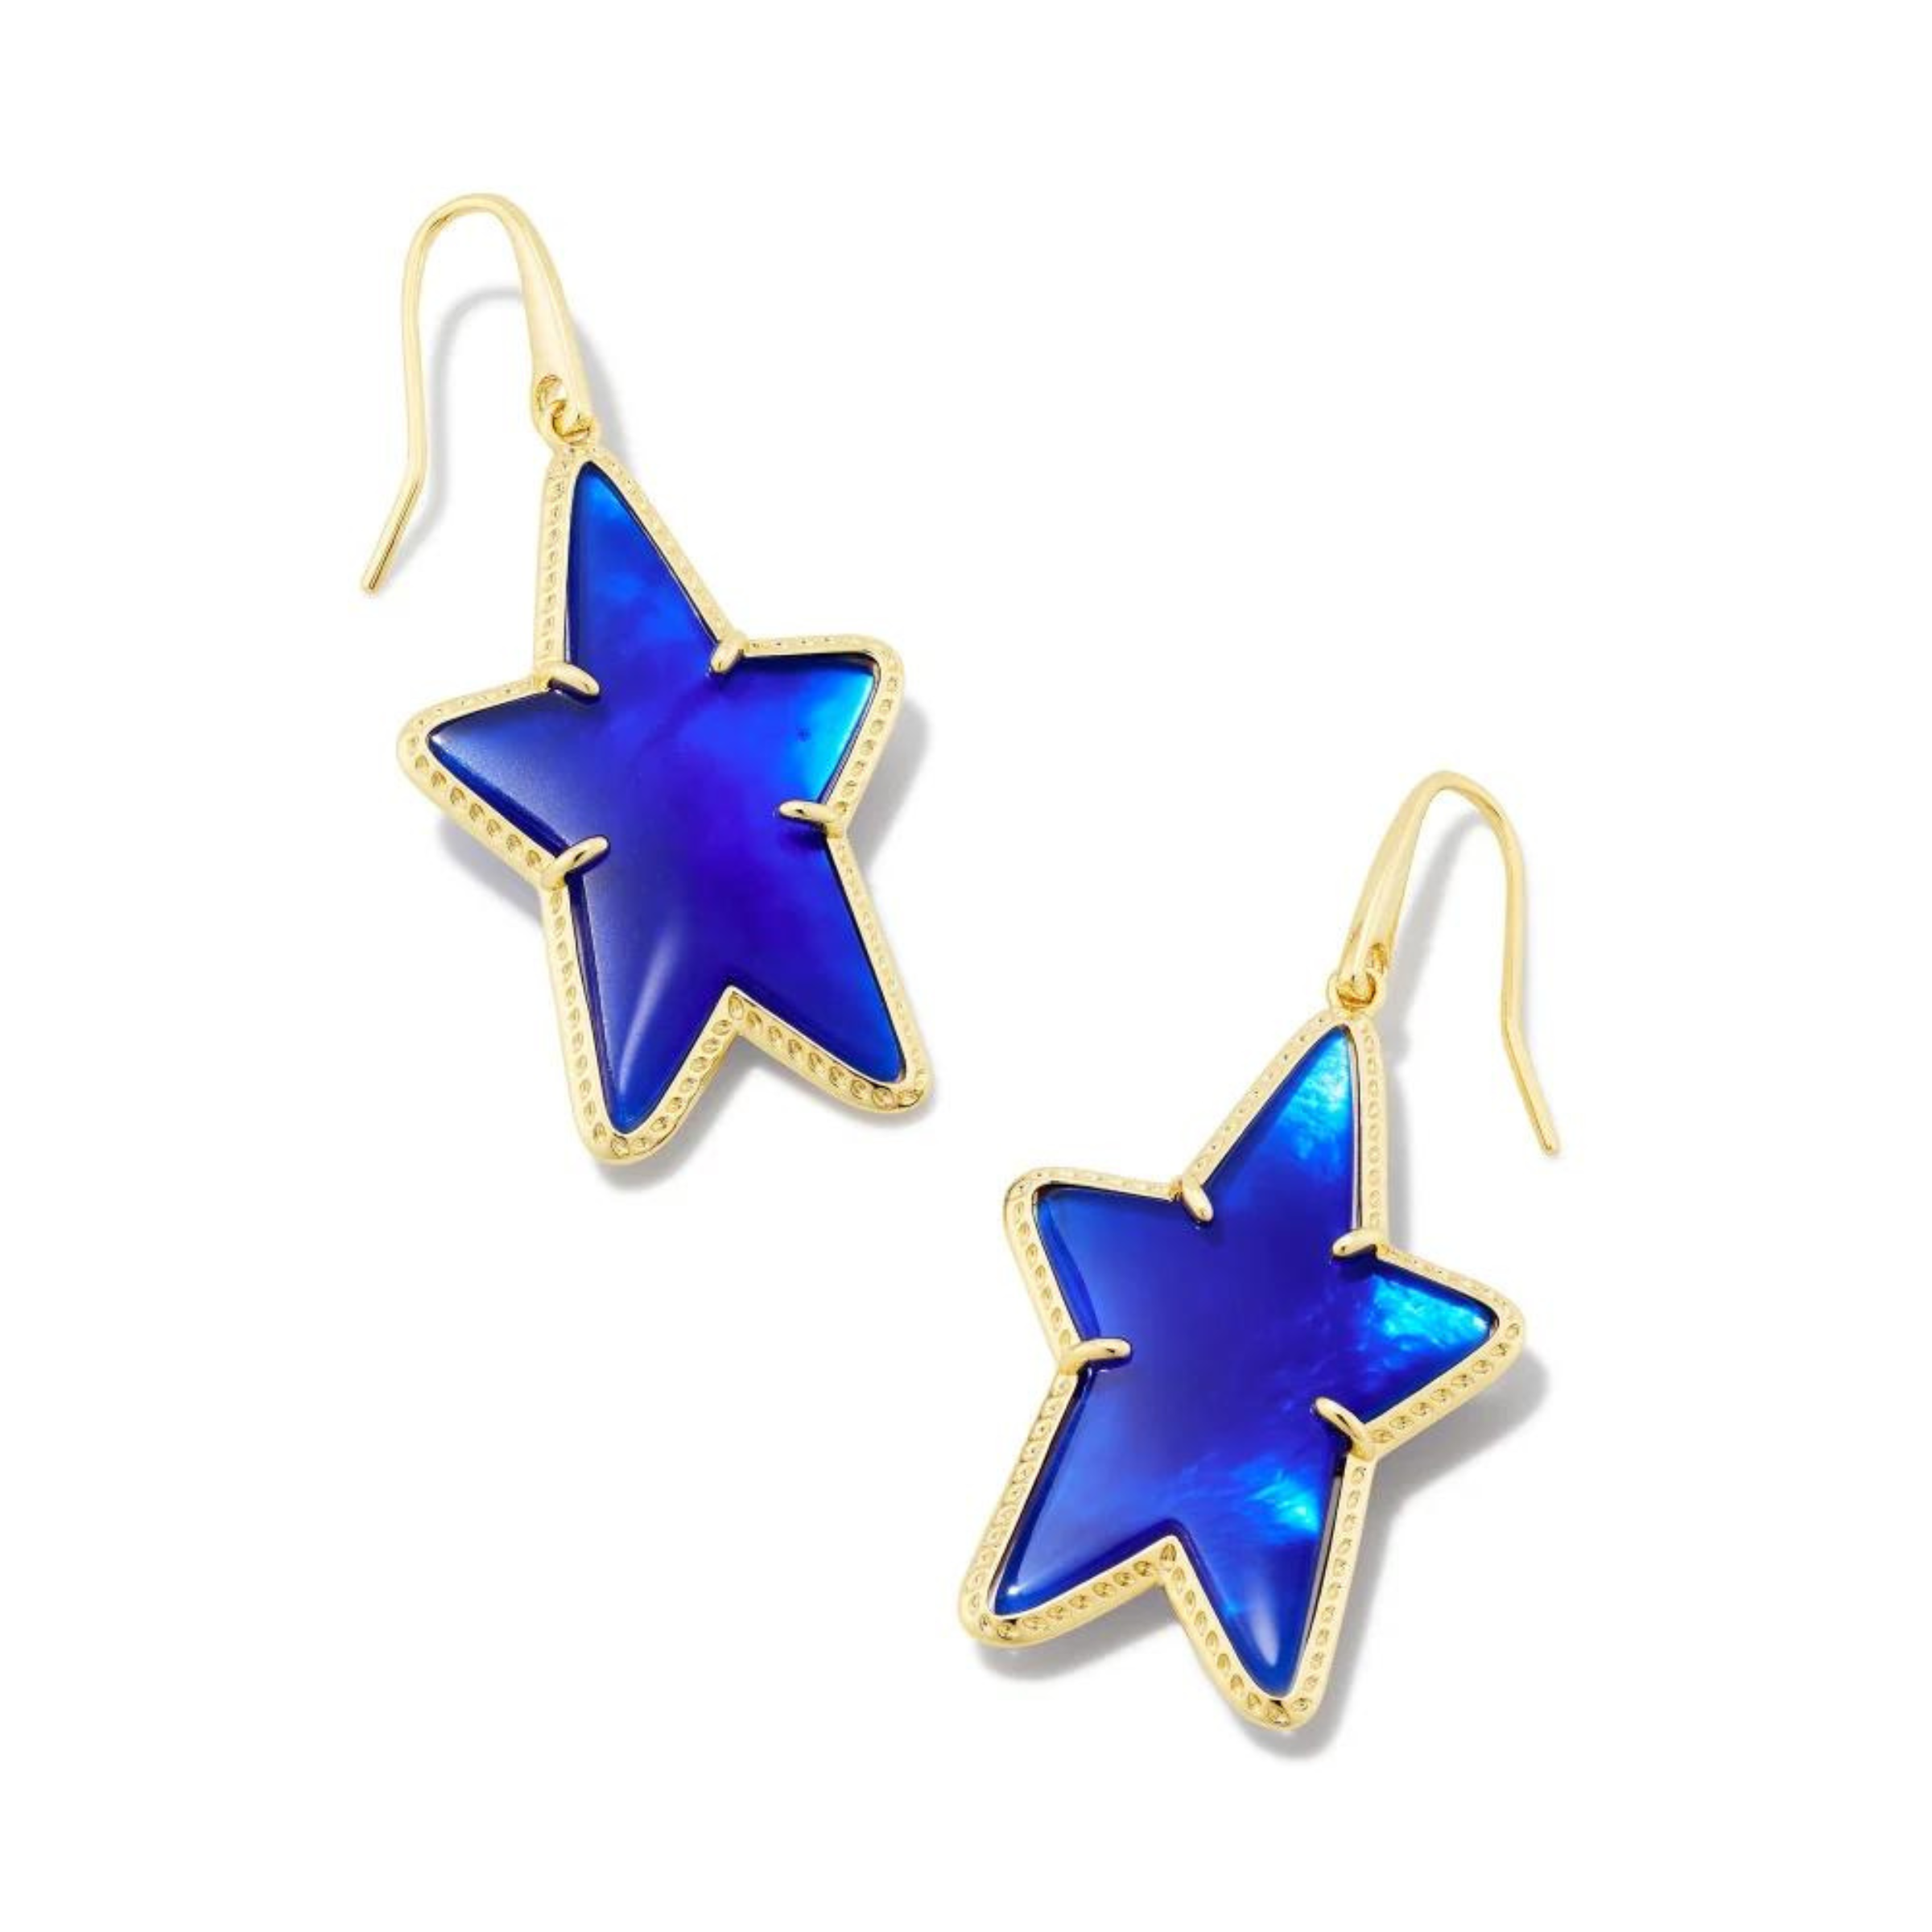 Pictured on a white background are gold fish hook earrings with a gold star dangle that includes a blue colored star shaped stone. 